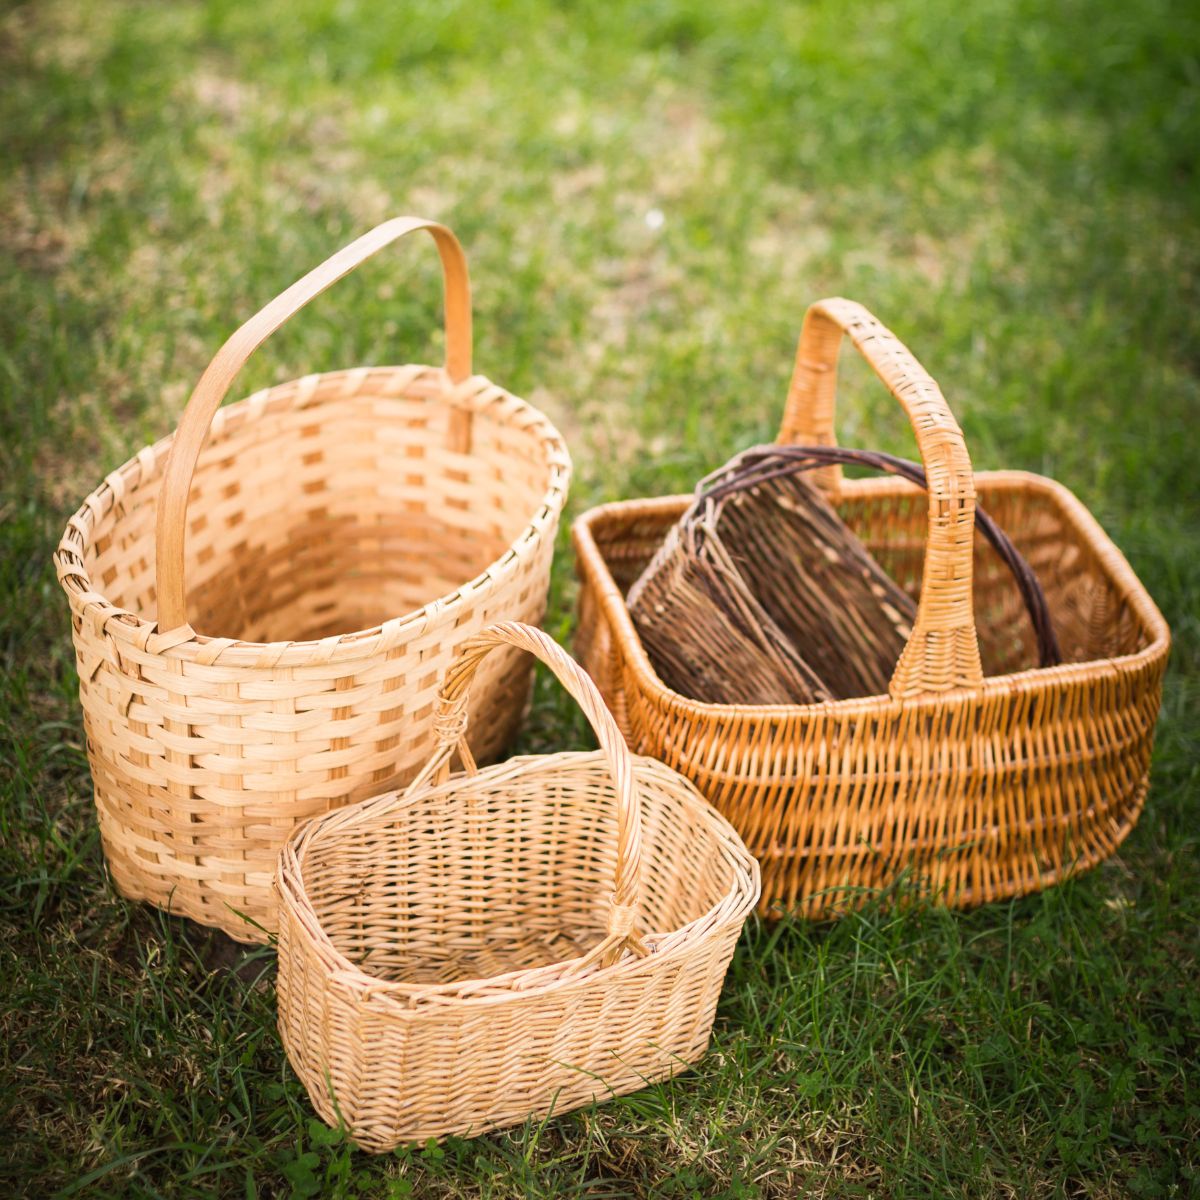 How to Clean Wicker Baskets